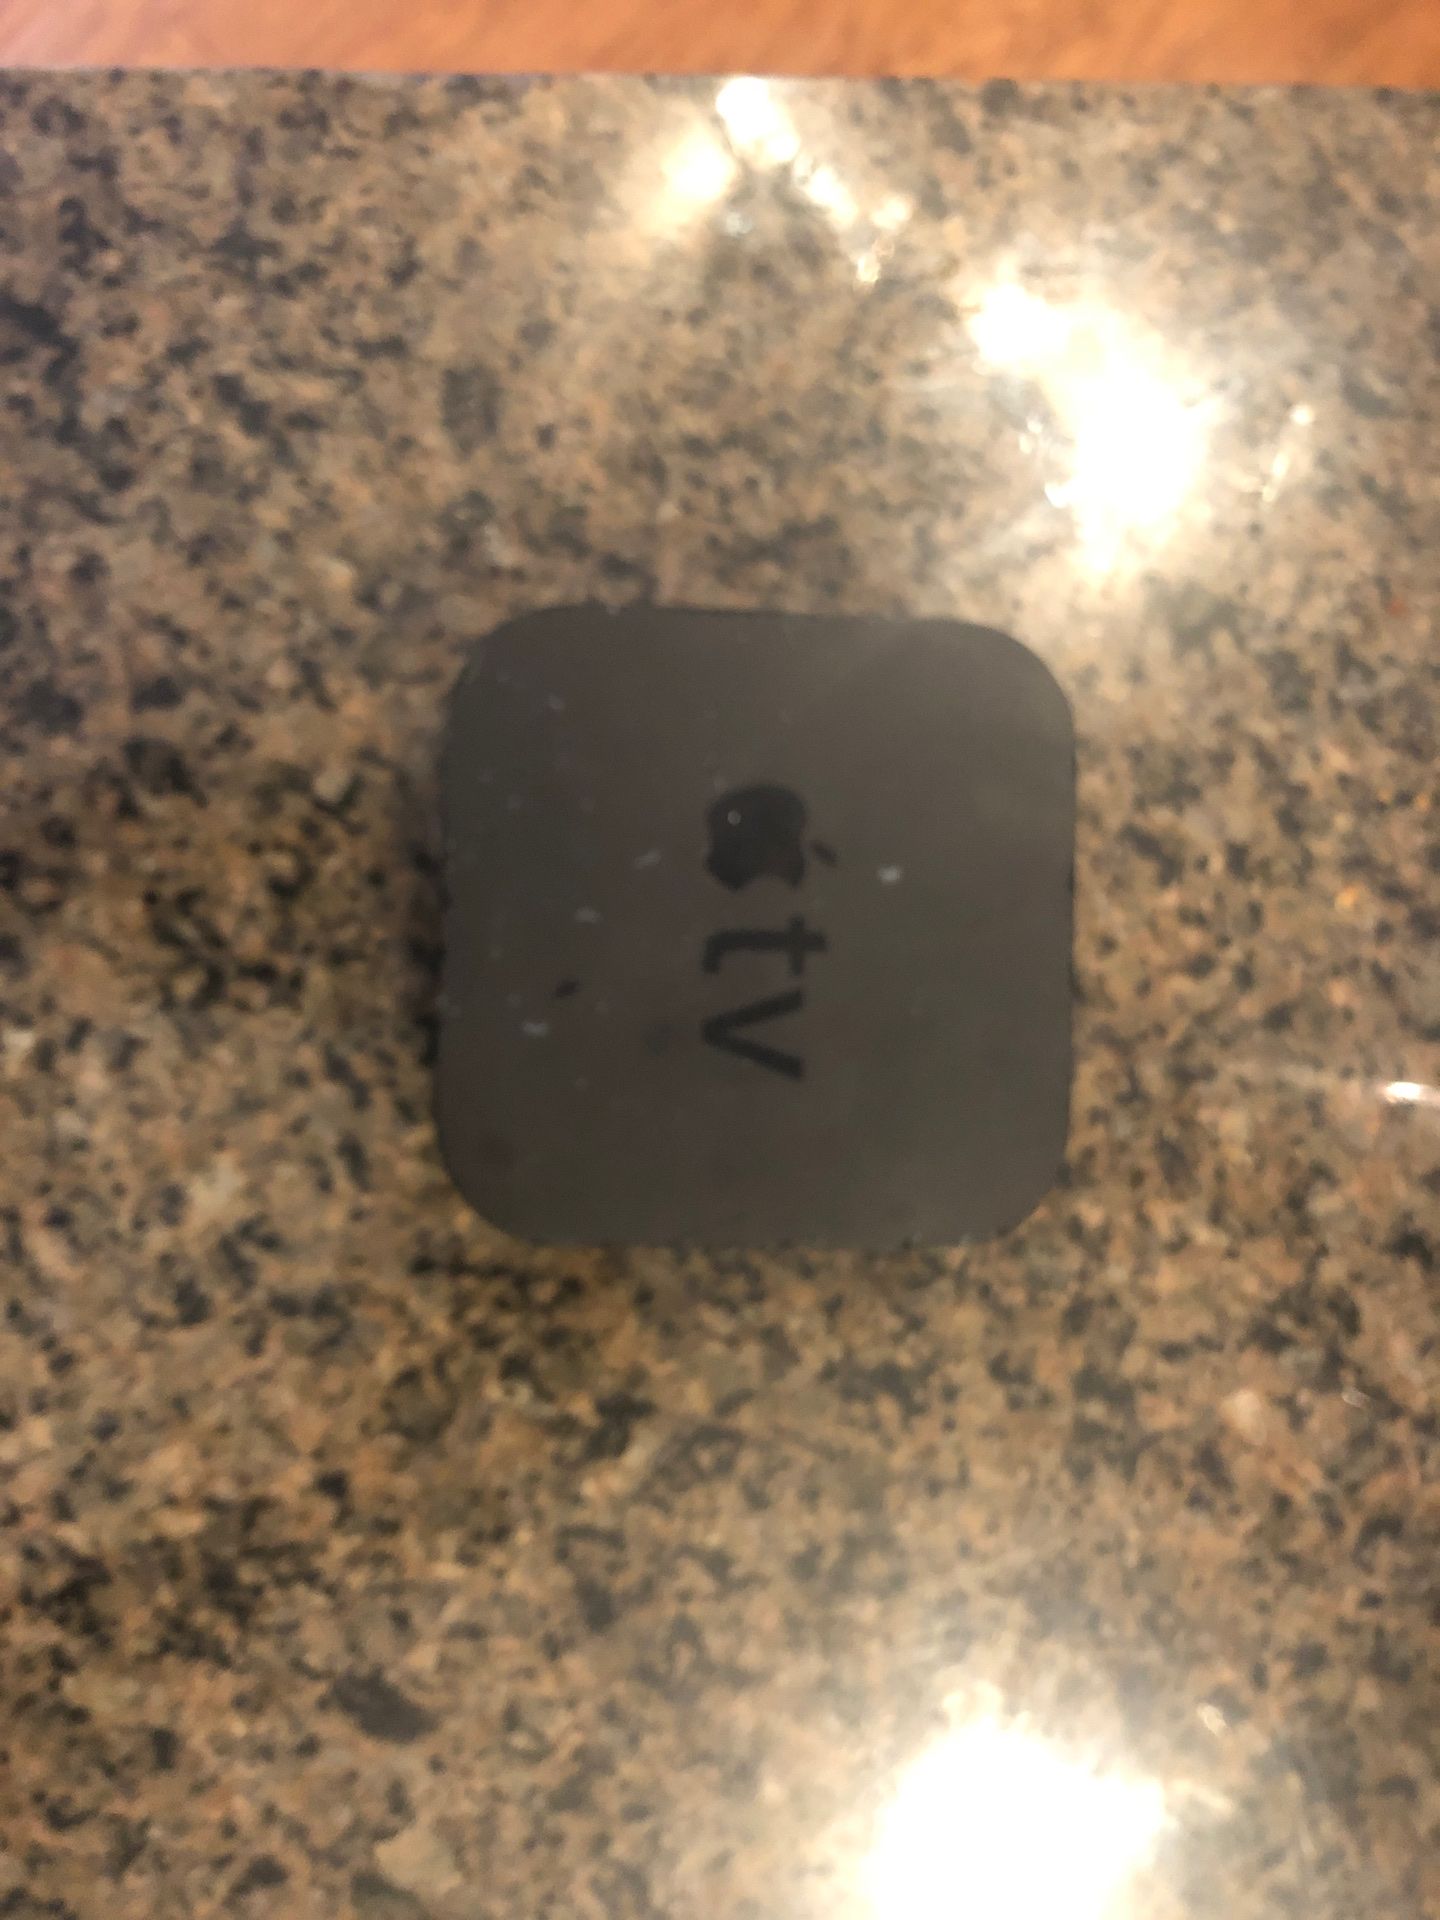 4th gen 64gb Apple TV wiped clean no remote or power cable